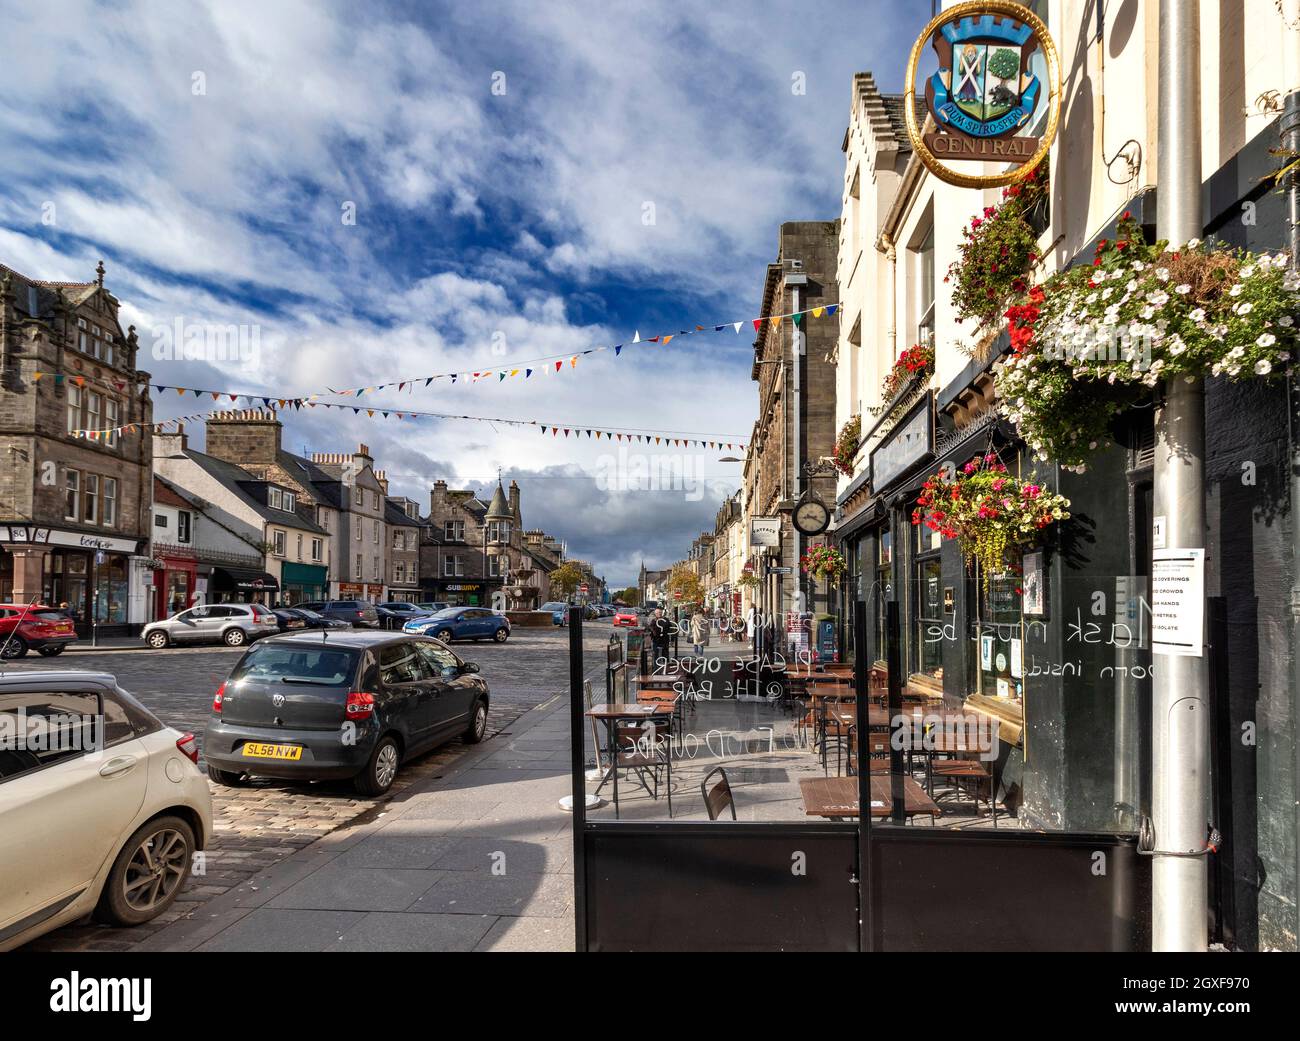 ST ANDREWS FIFE SCOTLAND MARKET STREET SHOPS CAFES AND FLOWERS Stock Photo